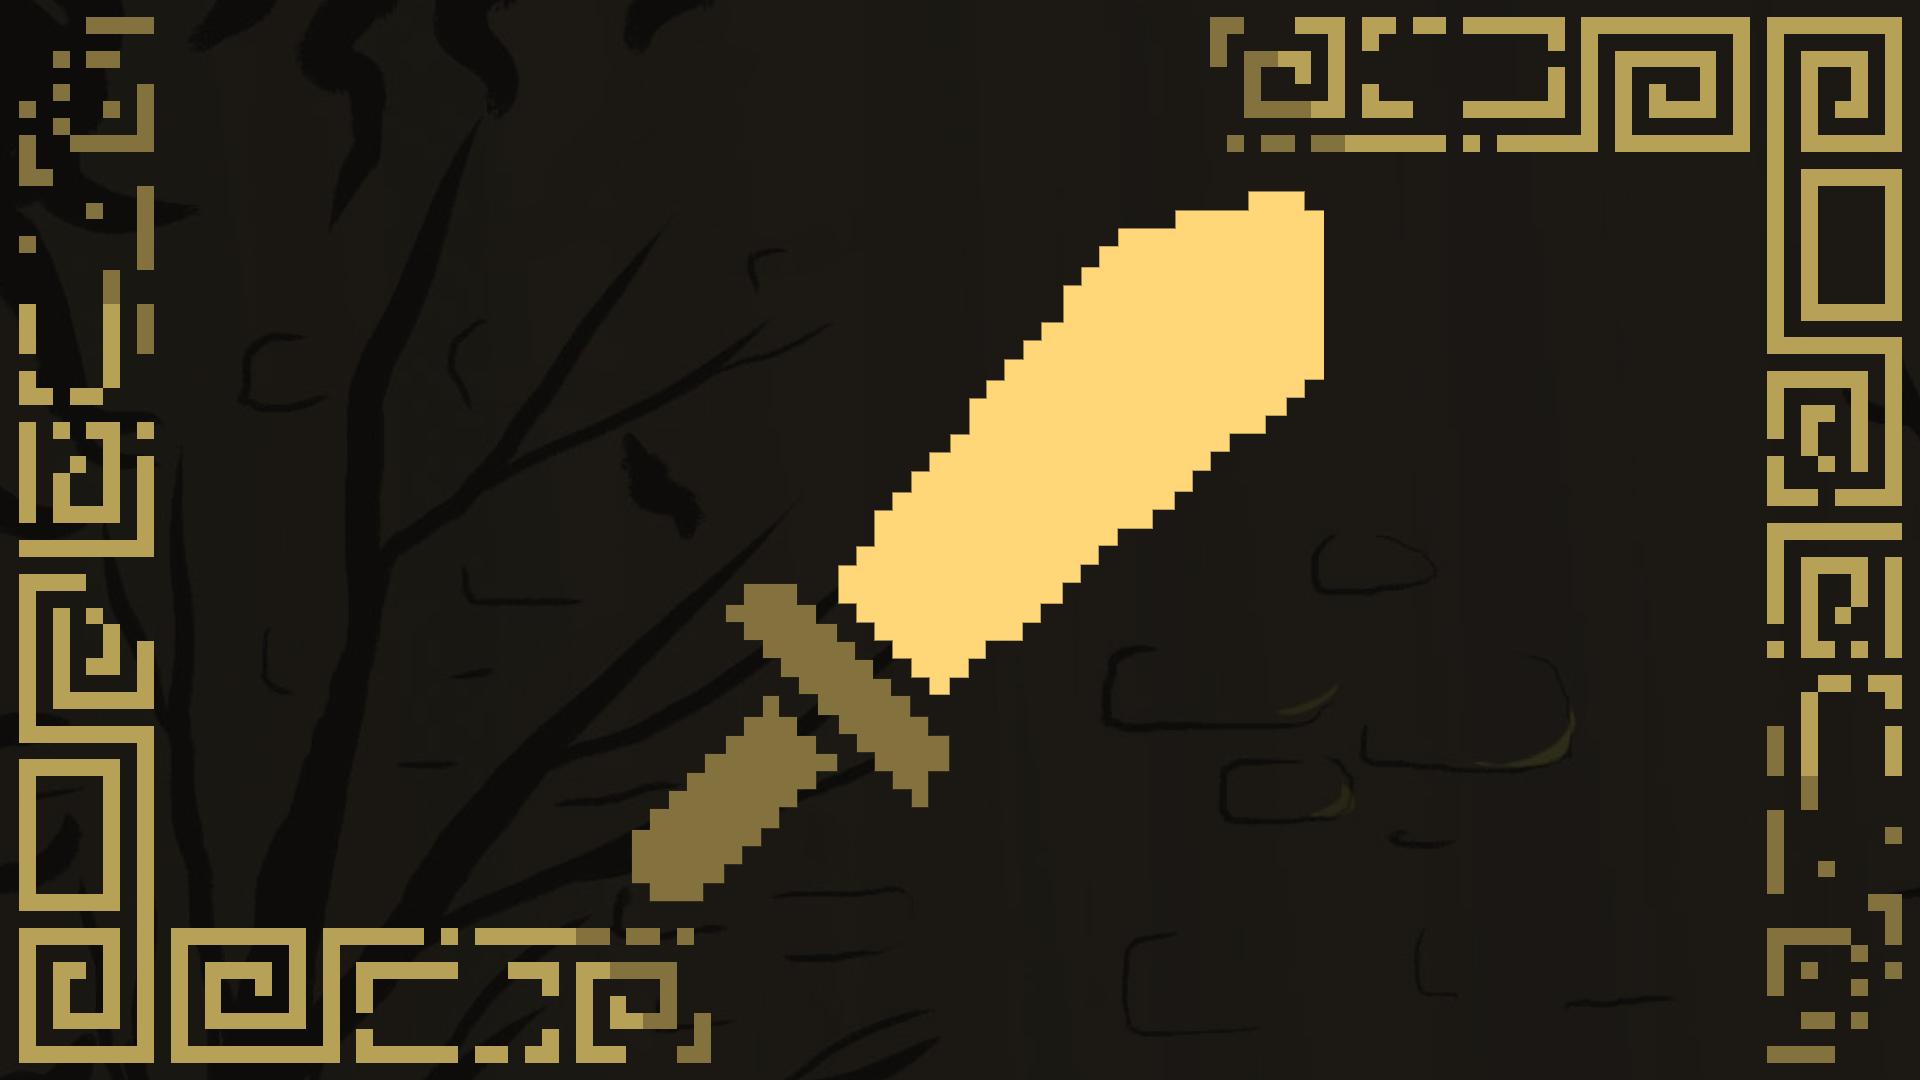 Icon for Sword